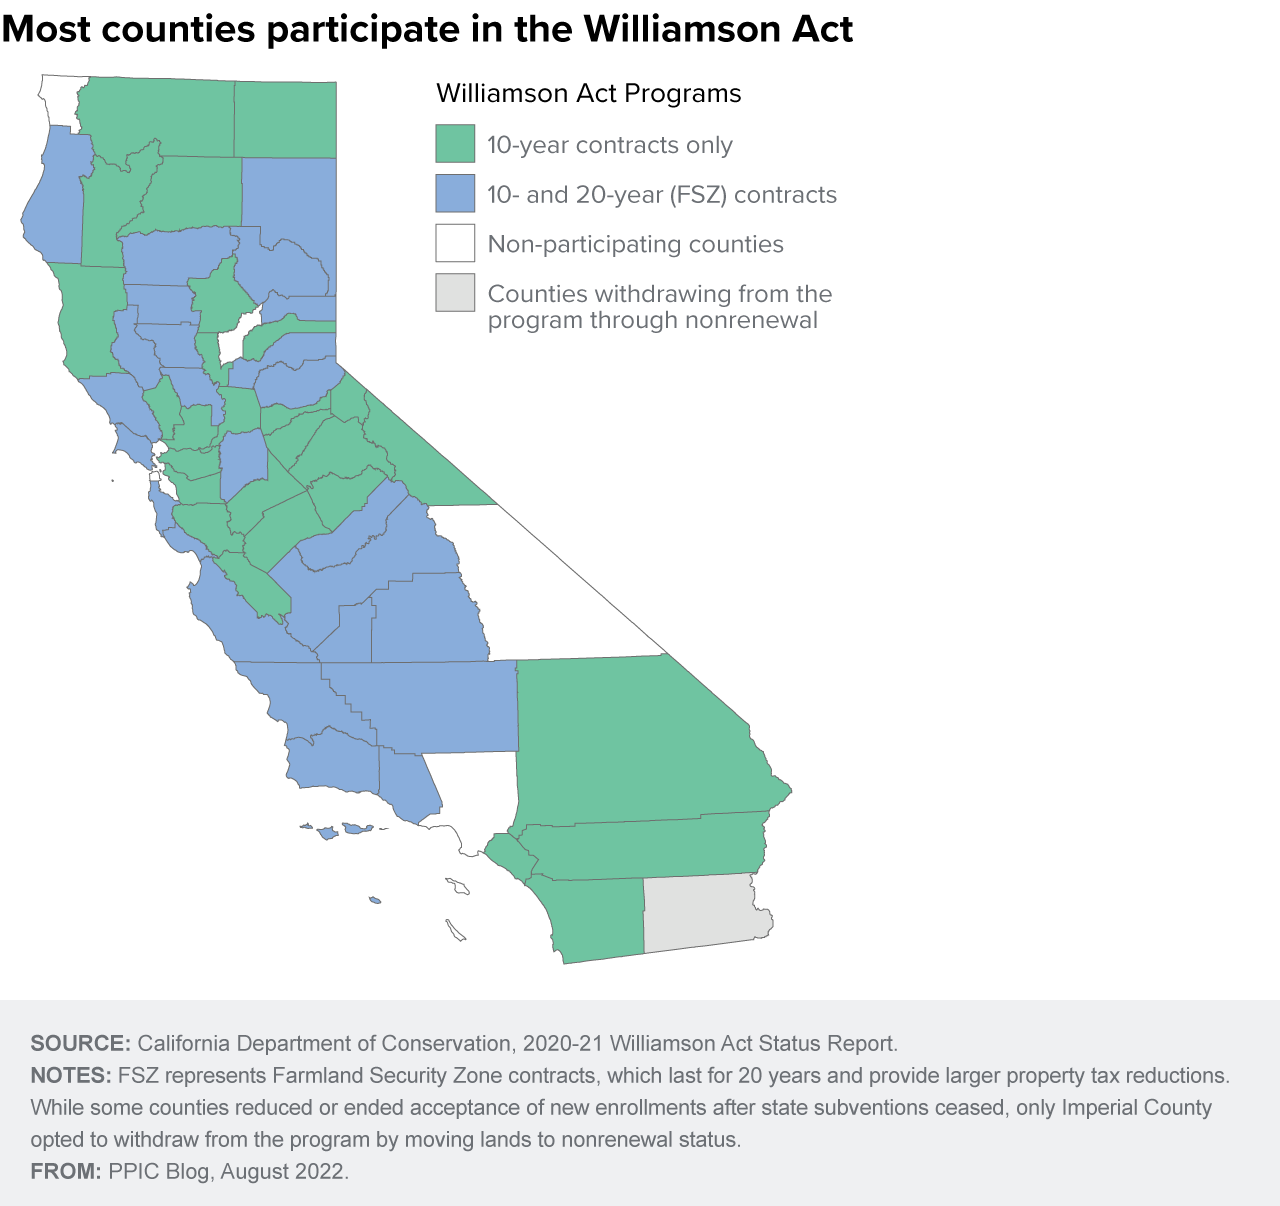 figure - Most counties participate in the Williamson Act